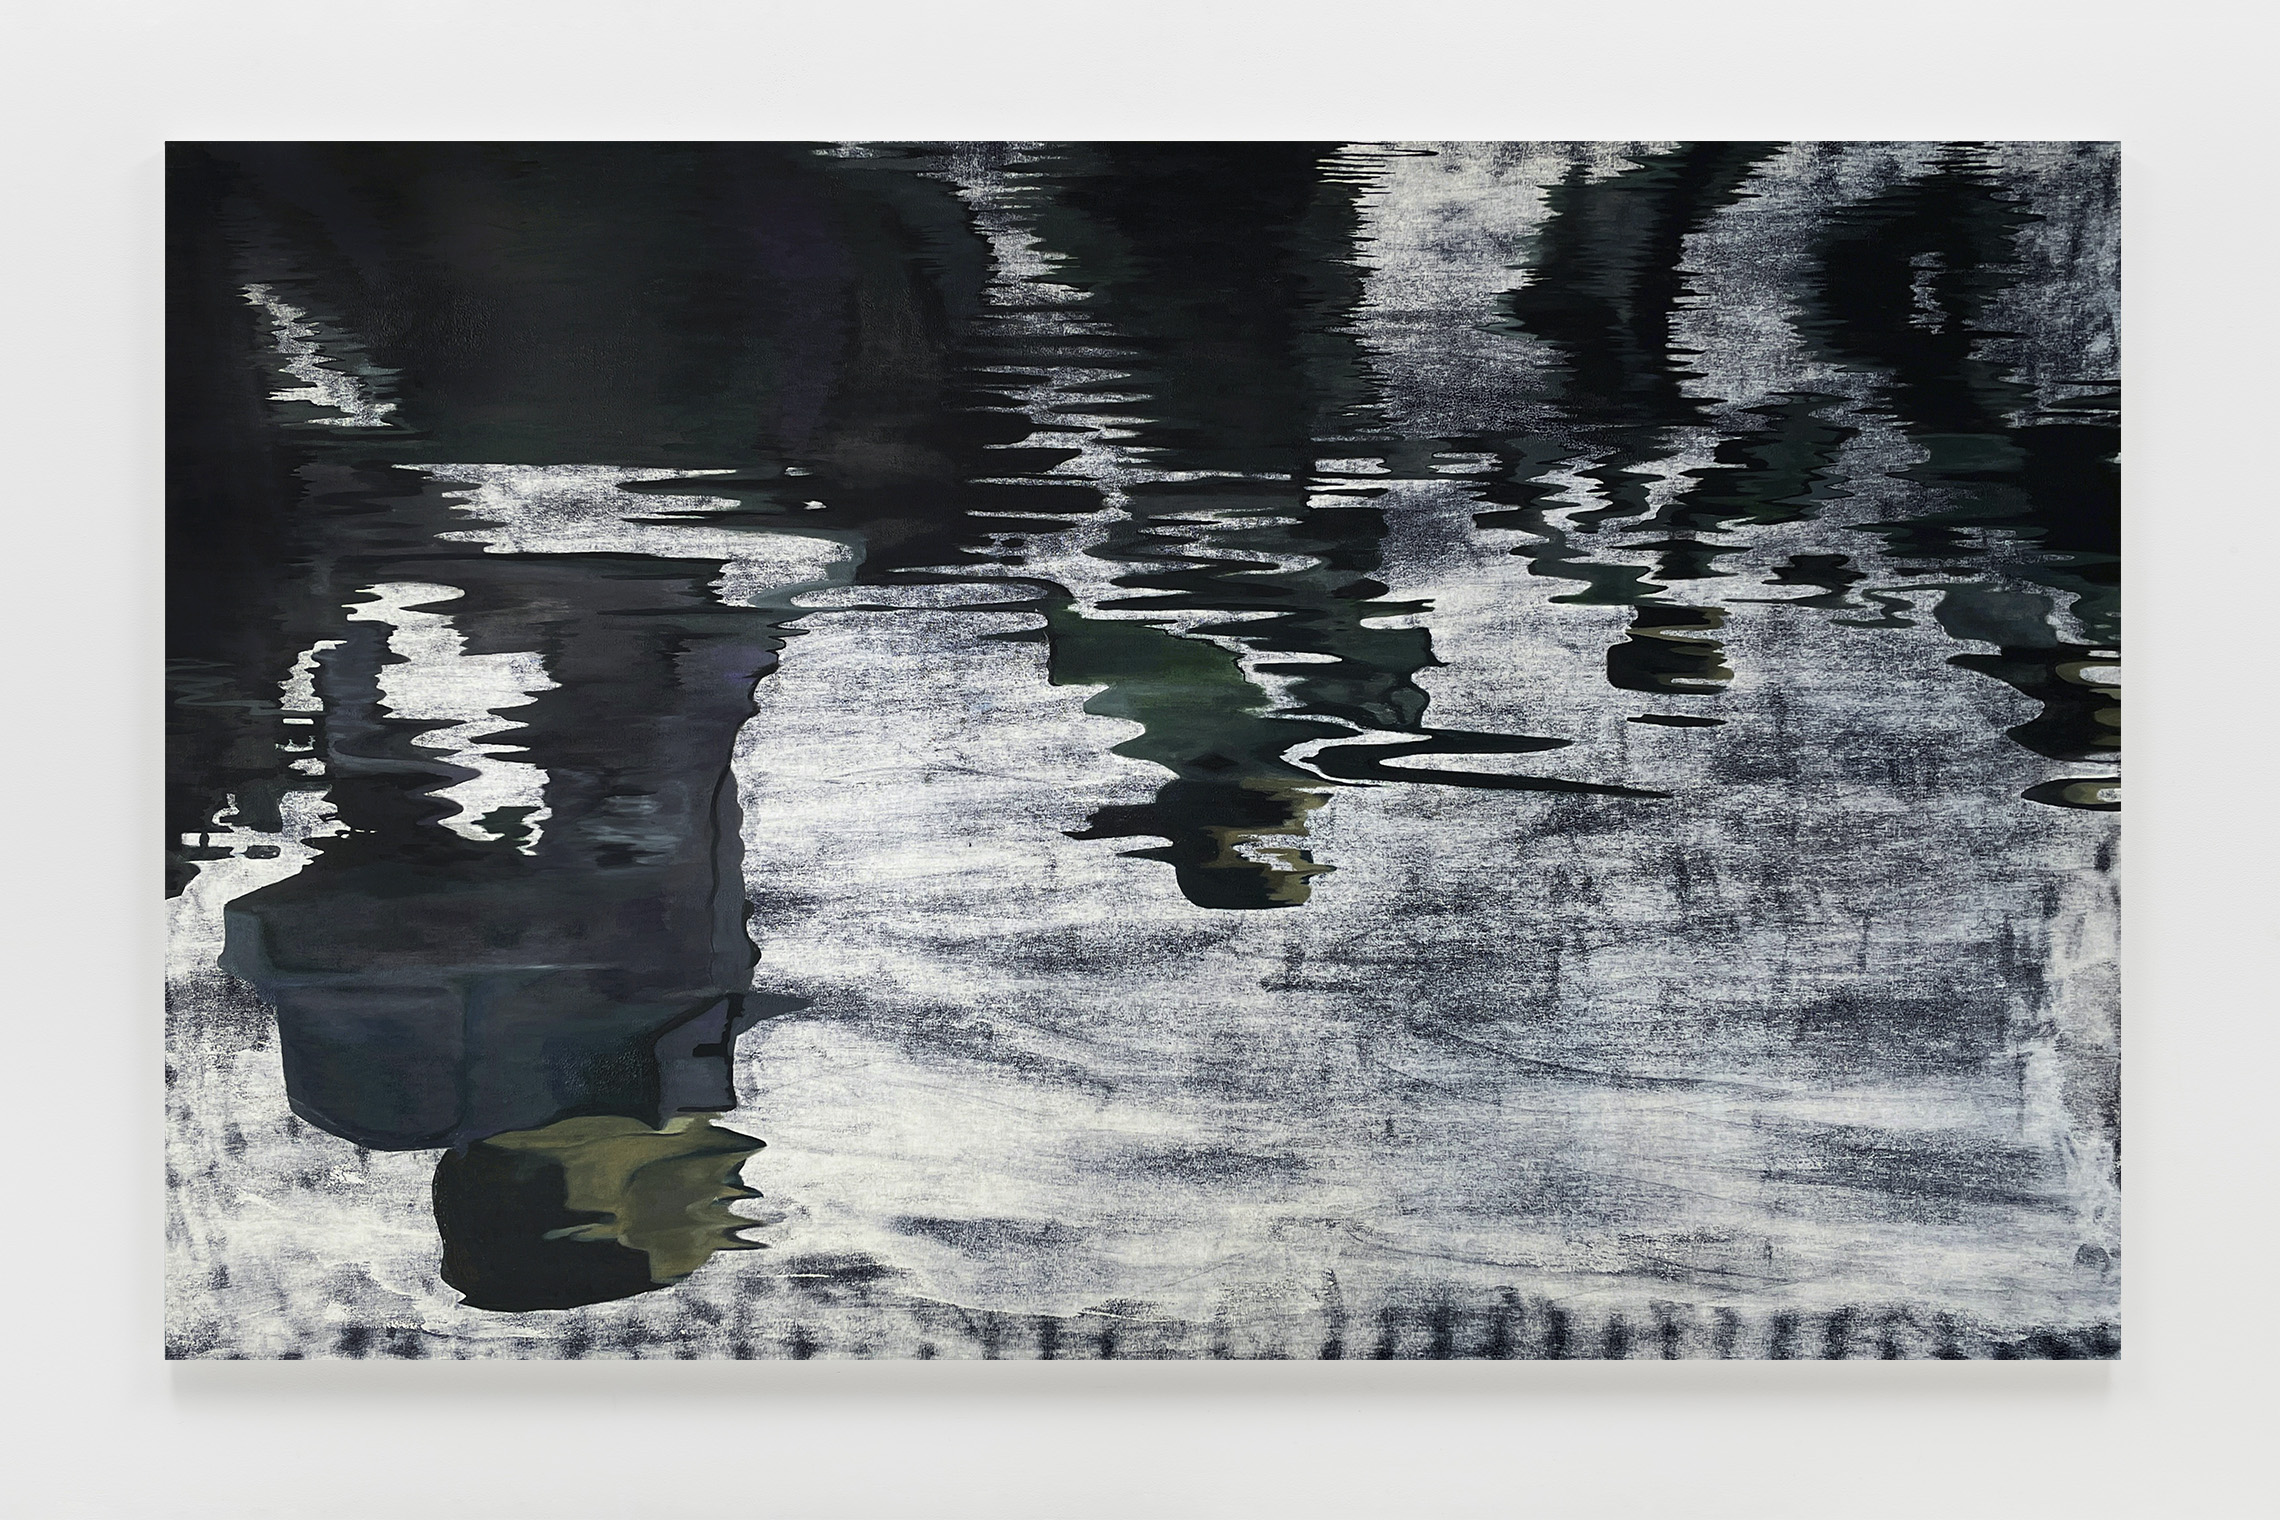 Michael and Chiyan Ho, Afloat for Another Two Seconds, 2021, oil and acrylic on canvas, 135 x 225 cm, 53 1/8 x 88 5/8 in.